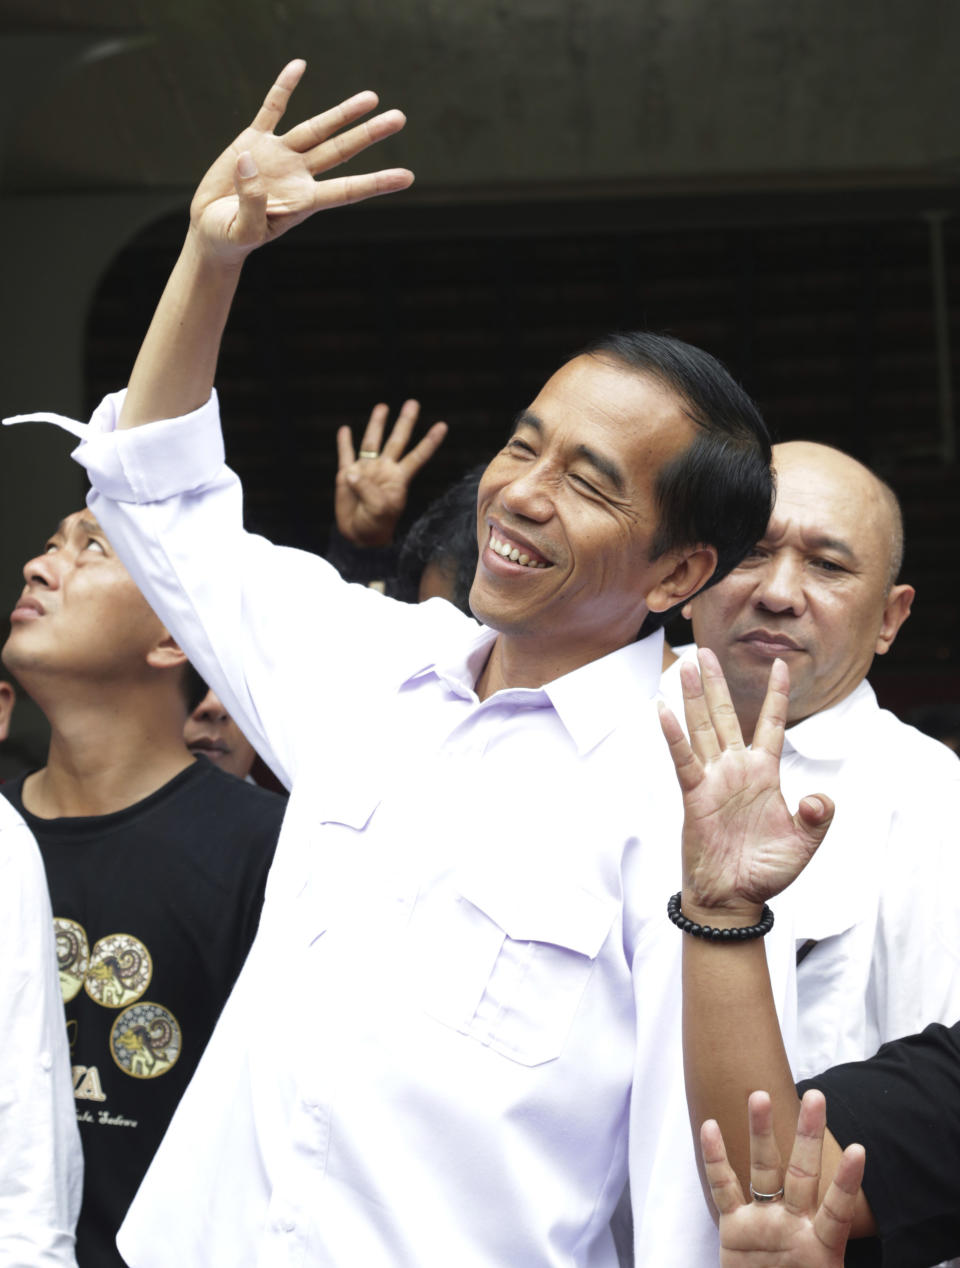 In this Sunday, March 16, 2014 photo, Indonesian presidential candidate Joko Widodo gestures during a campaign rally in Jakarta, Indonesia. Jakarta Gov. Joko Widodo, known affectionately as Jokowi, has attracted legions of supporters, especially among the young, igniting the same type of hunger for change that galvanized many previously apathetic American voters to turn out for Barack Obama in 2008. The soft-spoken former furniture producer wears simple button-down shirts with no tie or jacket and has developed a reputation of getting up close and personal with the capital’s poor, from wading into floodwaters to visiting slums. (AP Photo/Achmad Ibrahim)